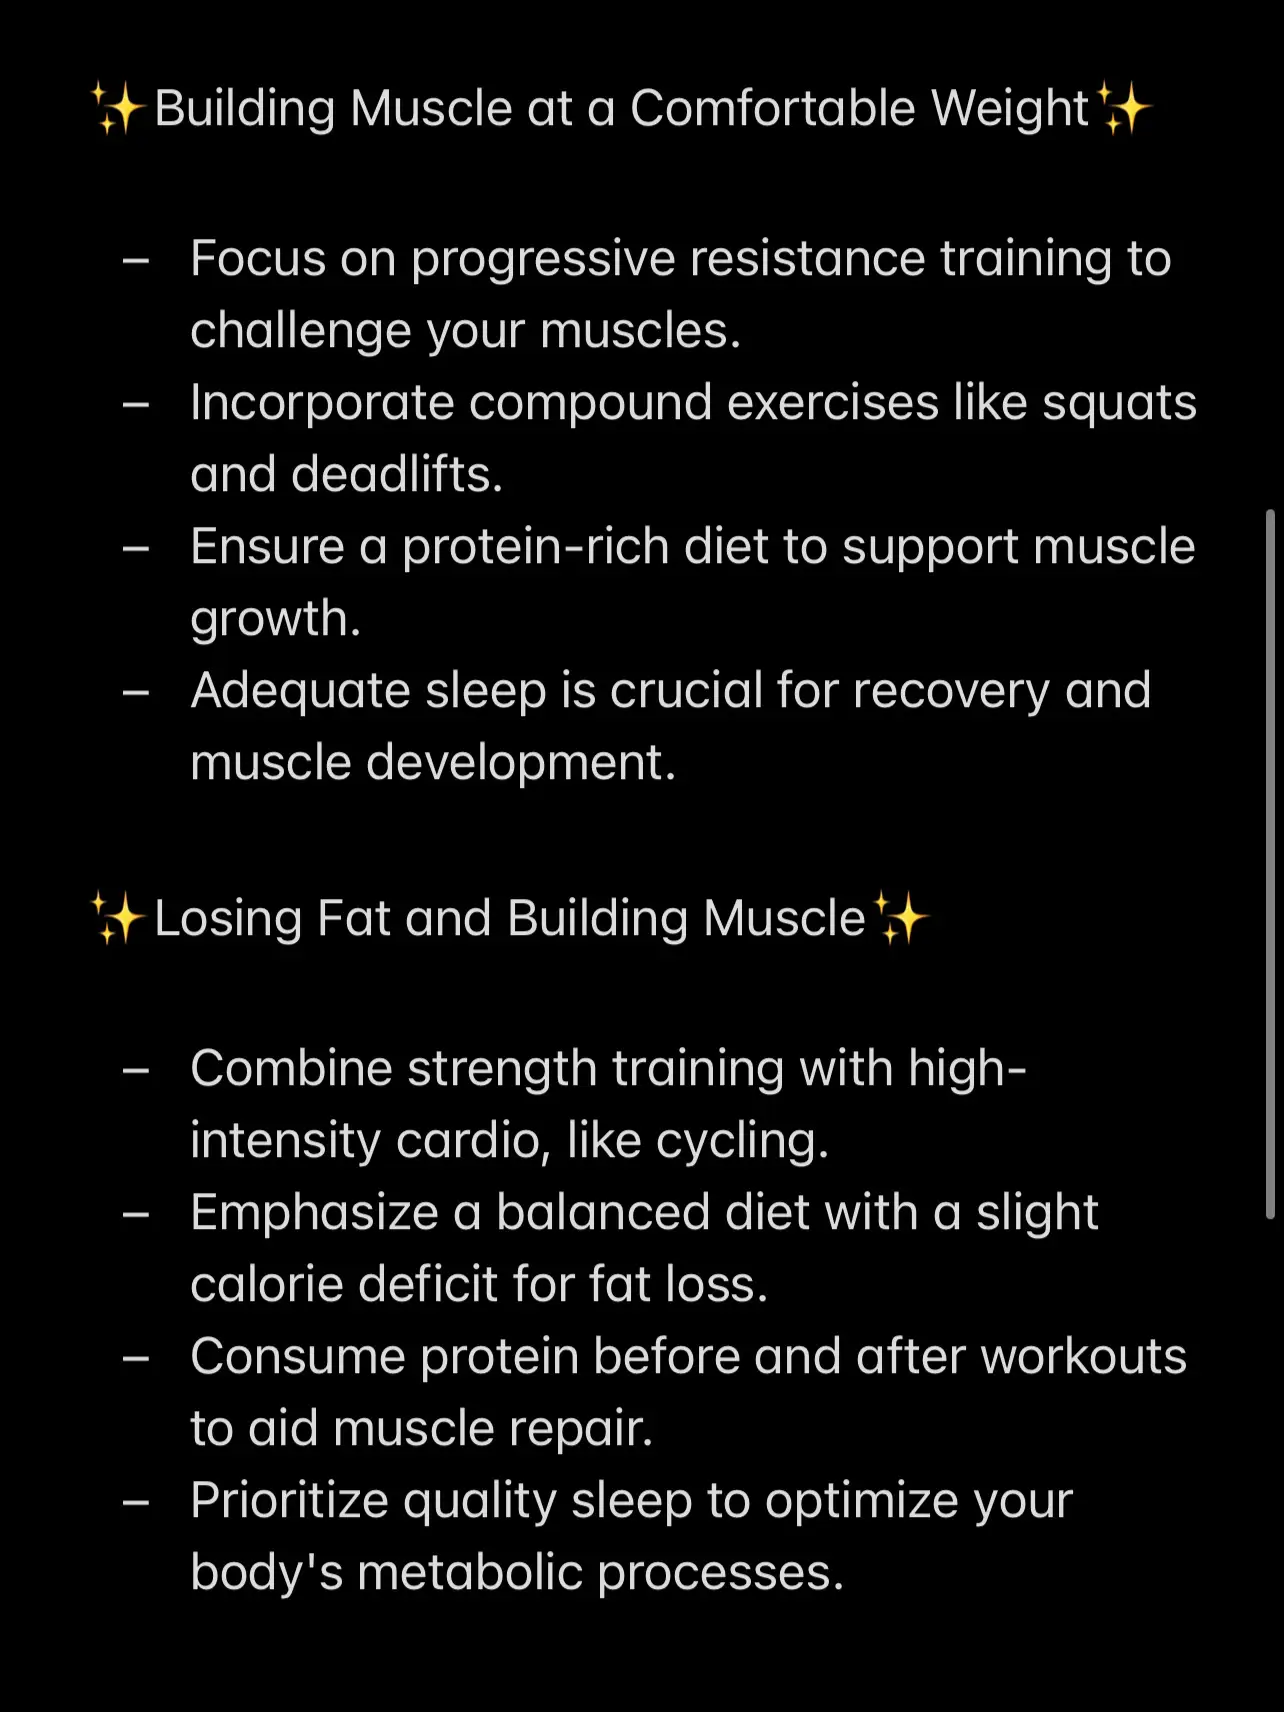 Maximize your muscle recovery! 💪 Remember to listen to your body and  adjust your training intensity as needed. These practices can